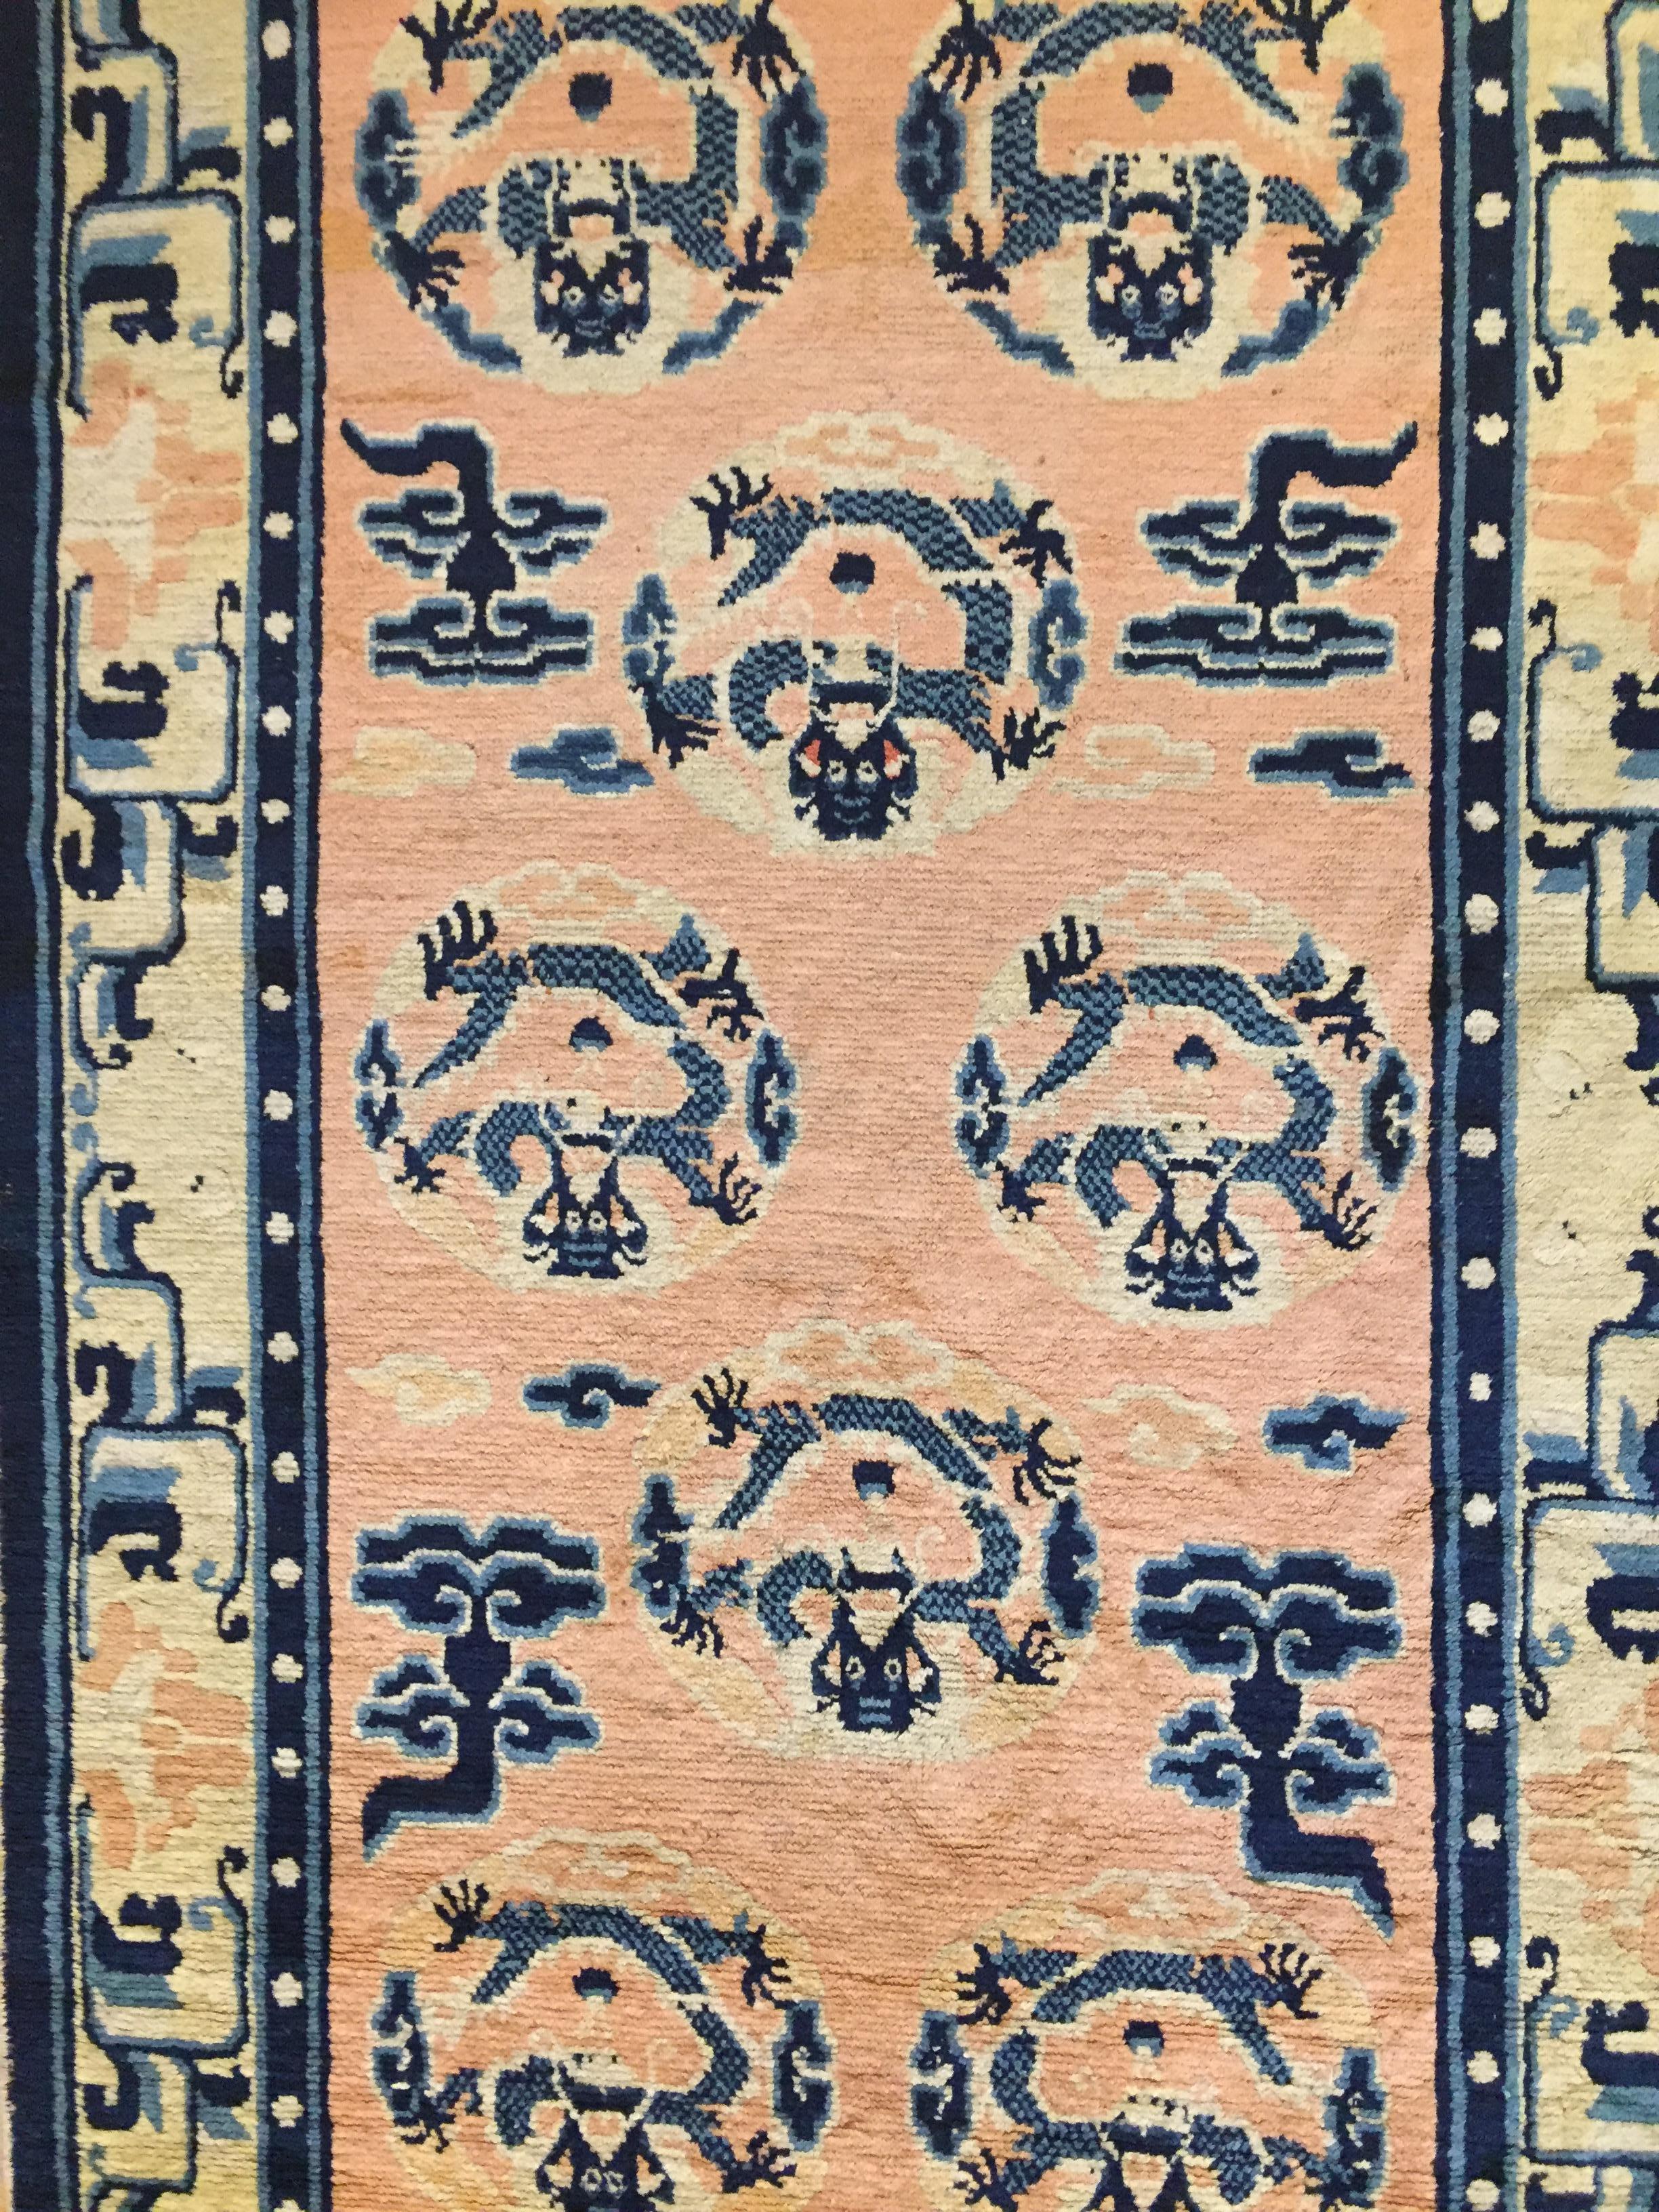 Chinoiserie 18th Century Chinese Imperial Ningxia Rug Eight Dragons Lotus Flower Pink Yellow